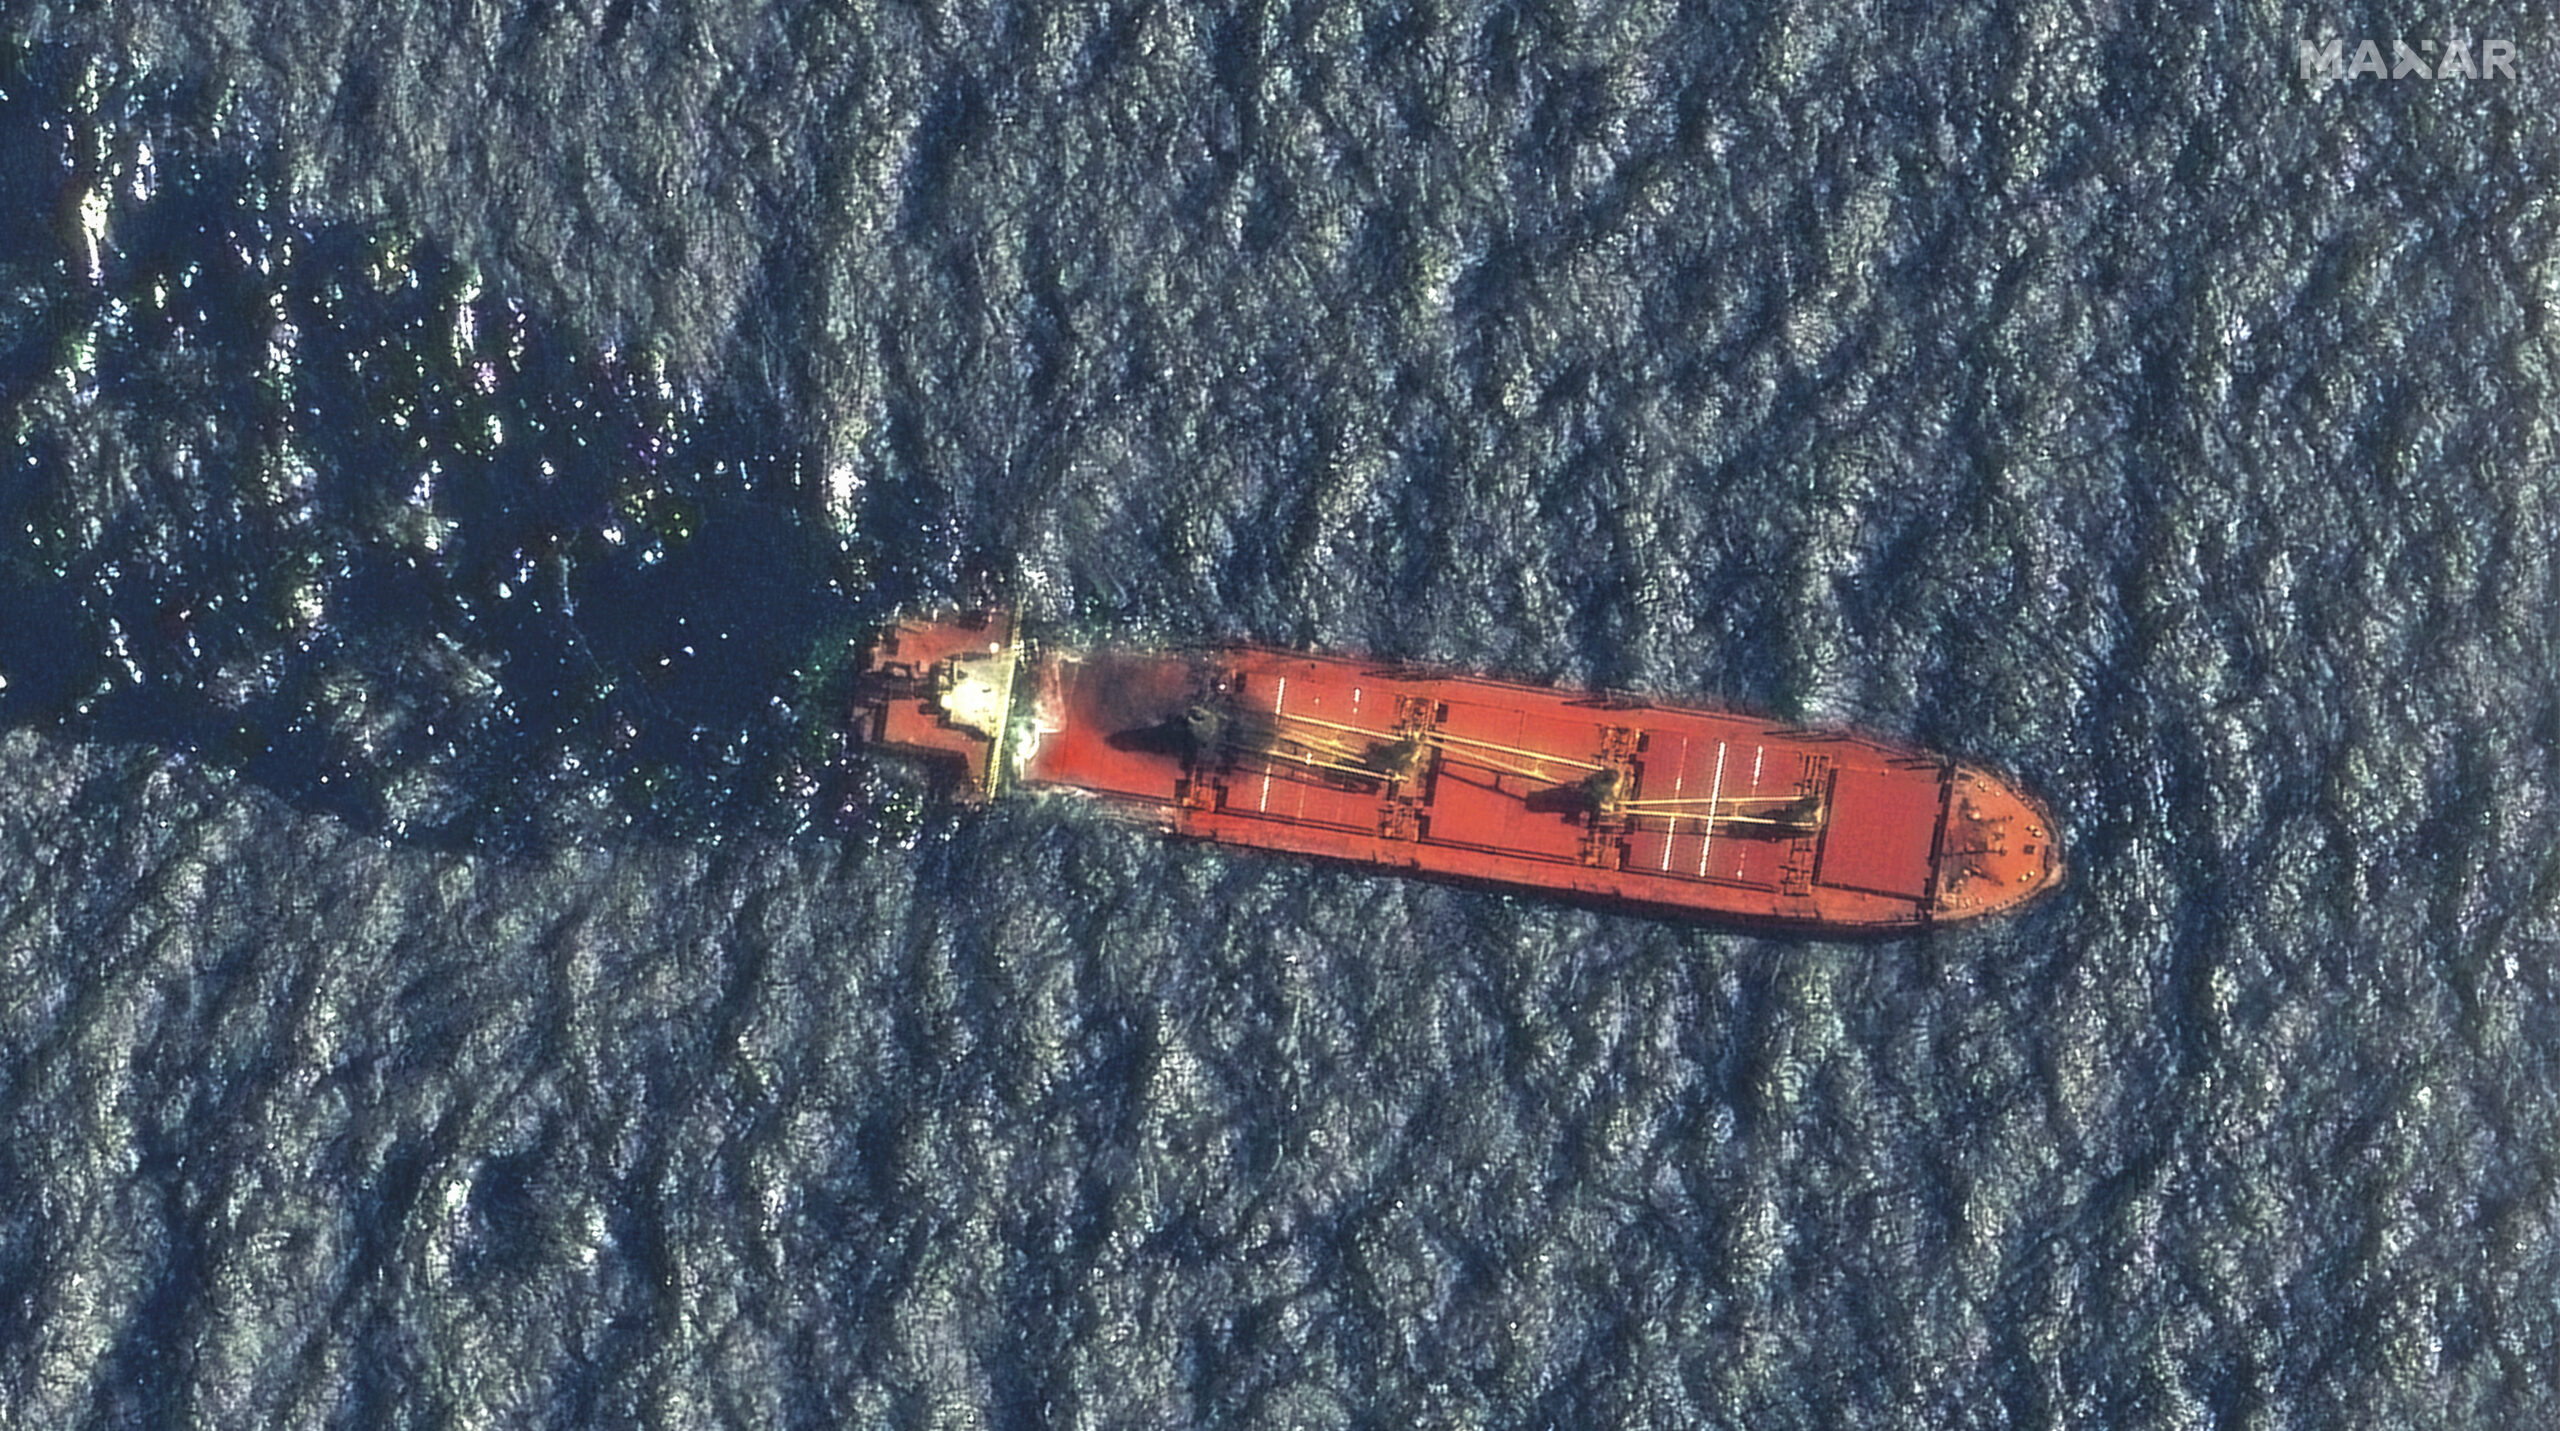 Ship hit by Yemen’s Houthi rebels sinks in Red Sea, first vessel lost in conflict